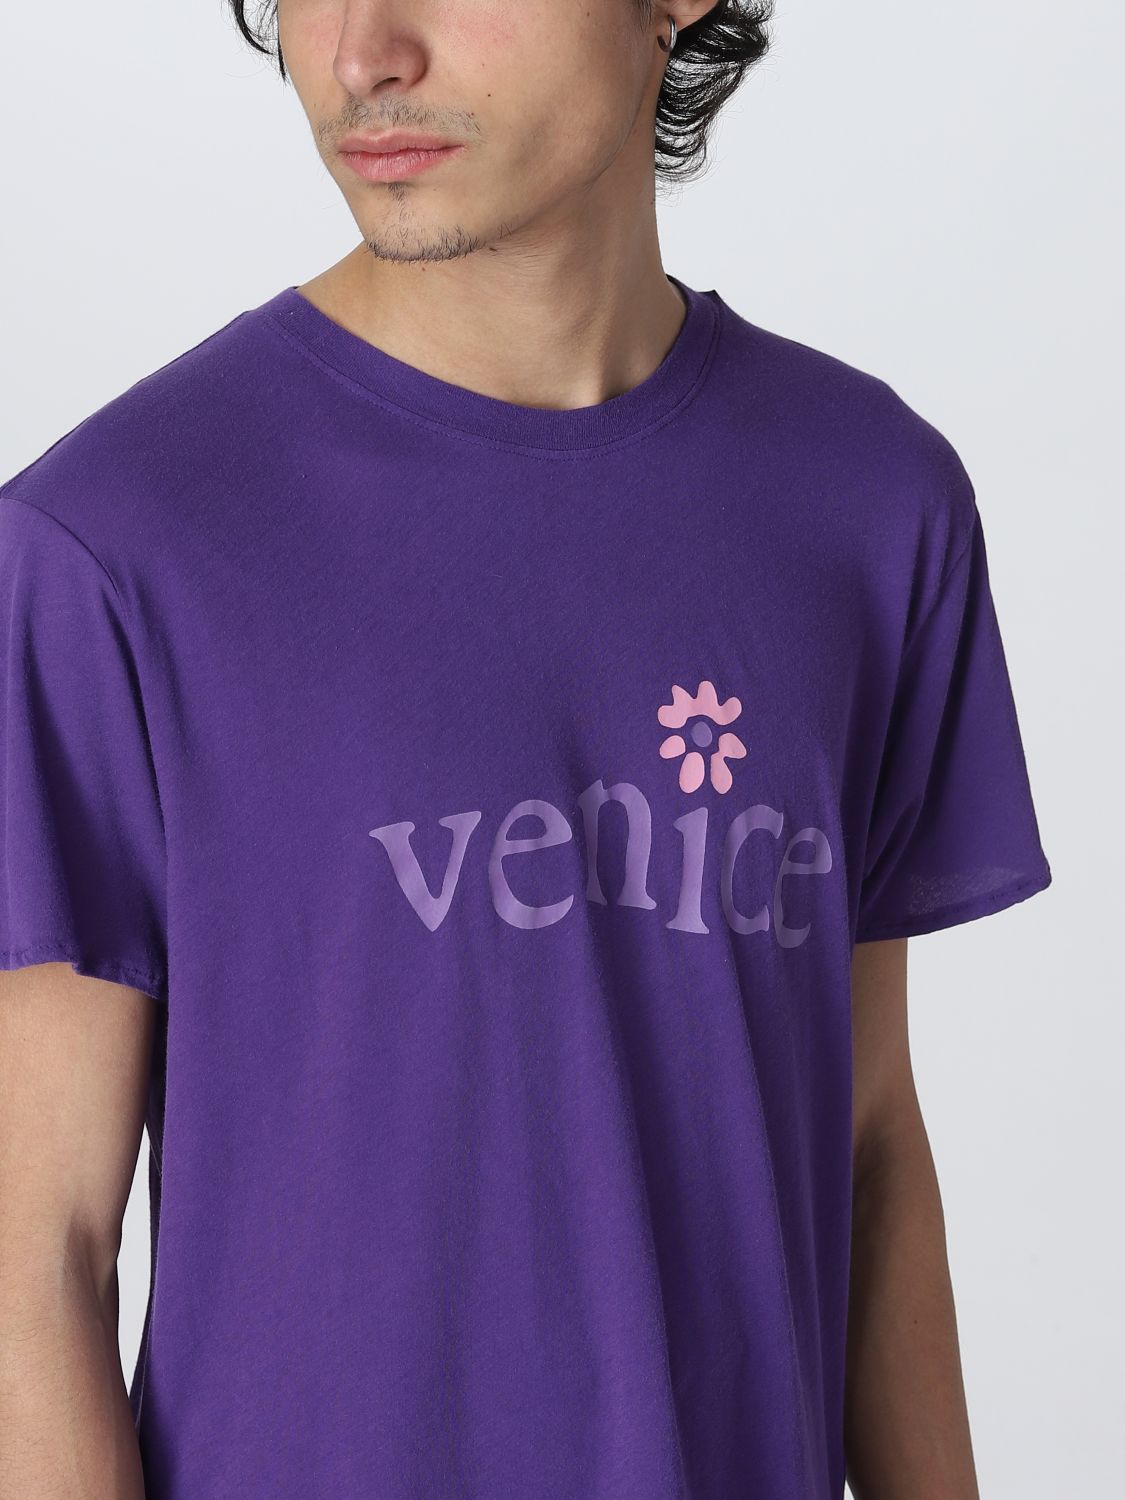 T-shirt Erl: T-shirt Erl con stampa venice viola 5